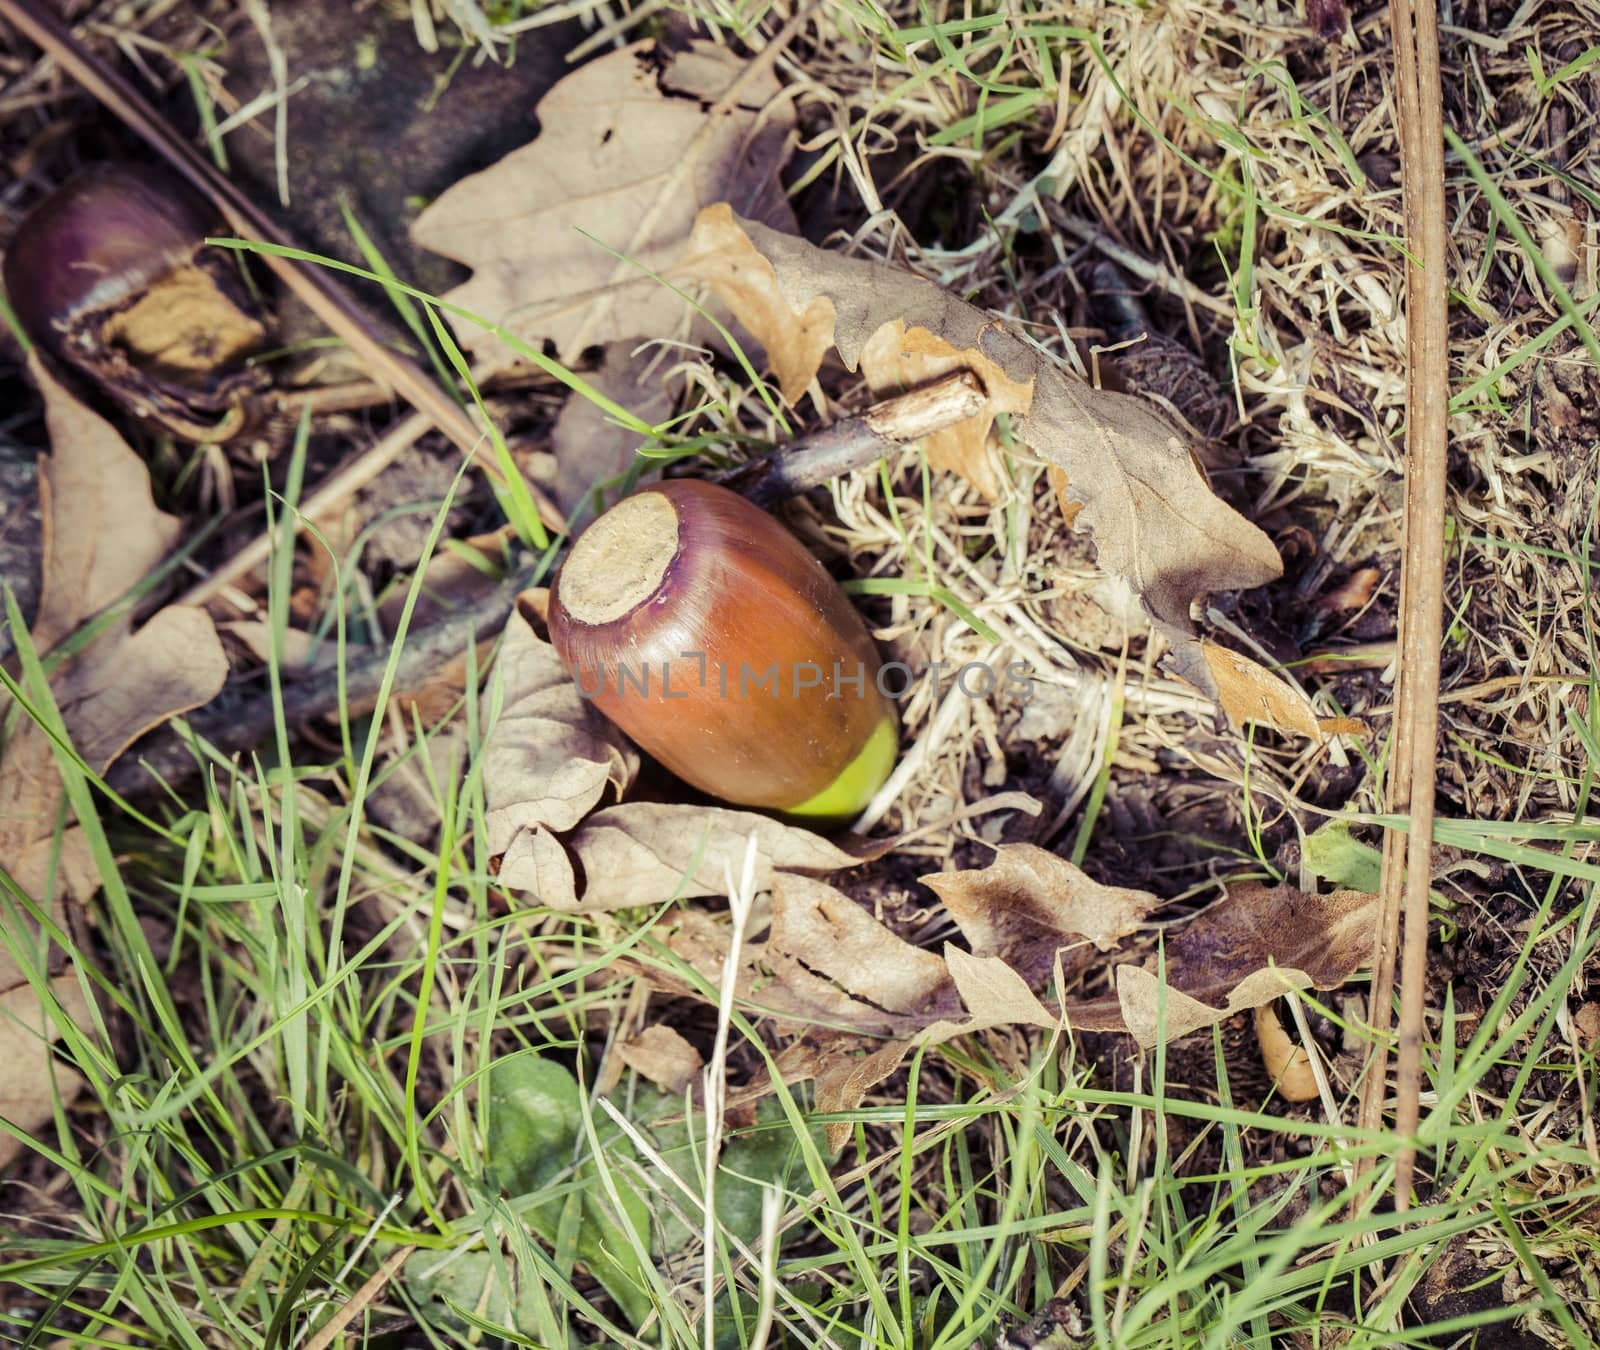 Close up picture of an acorn found in the ground